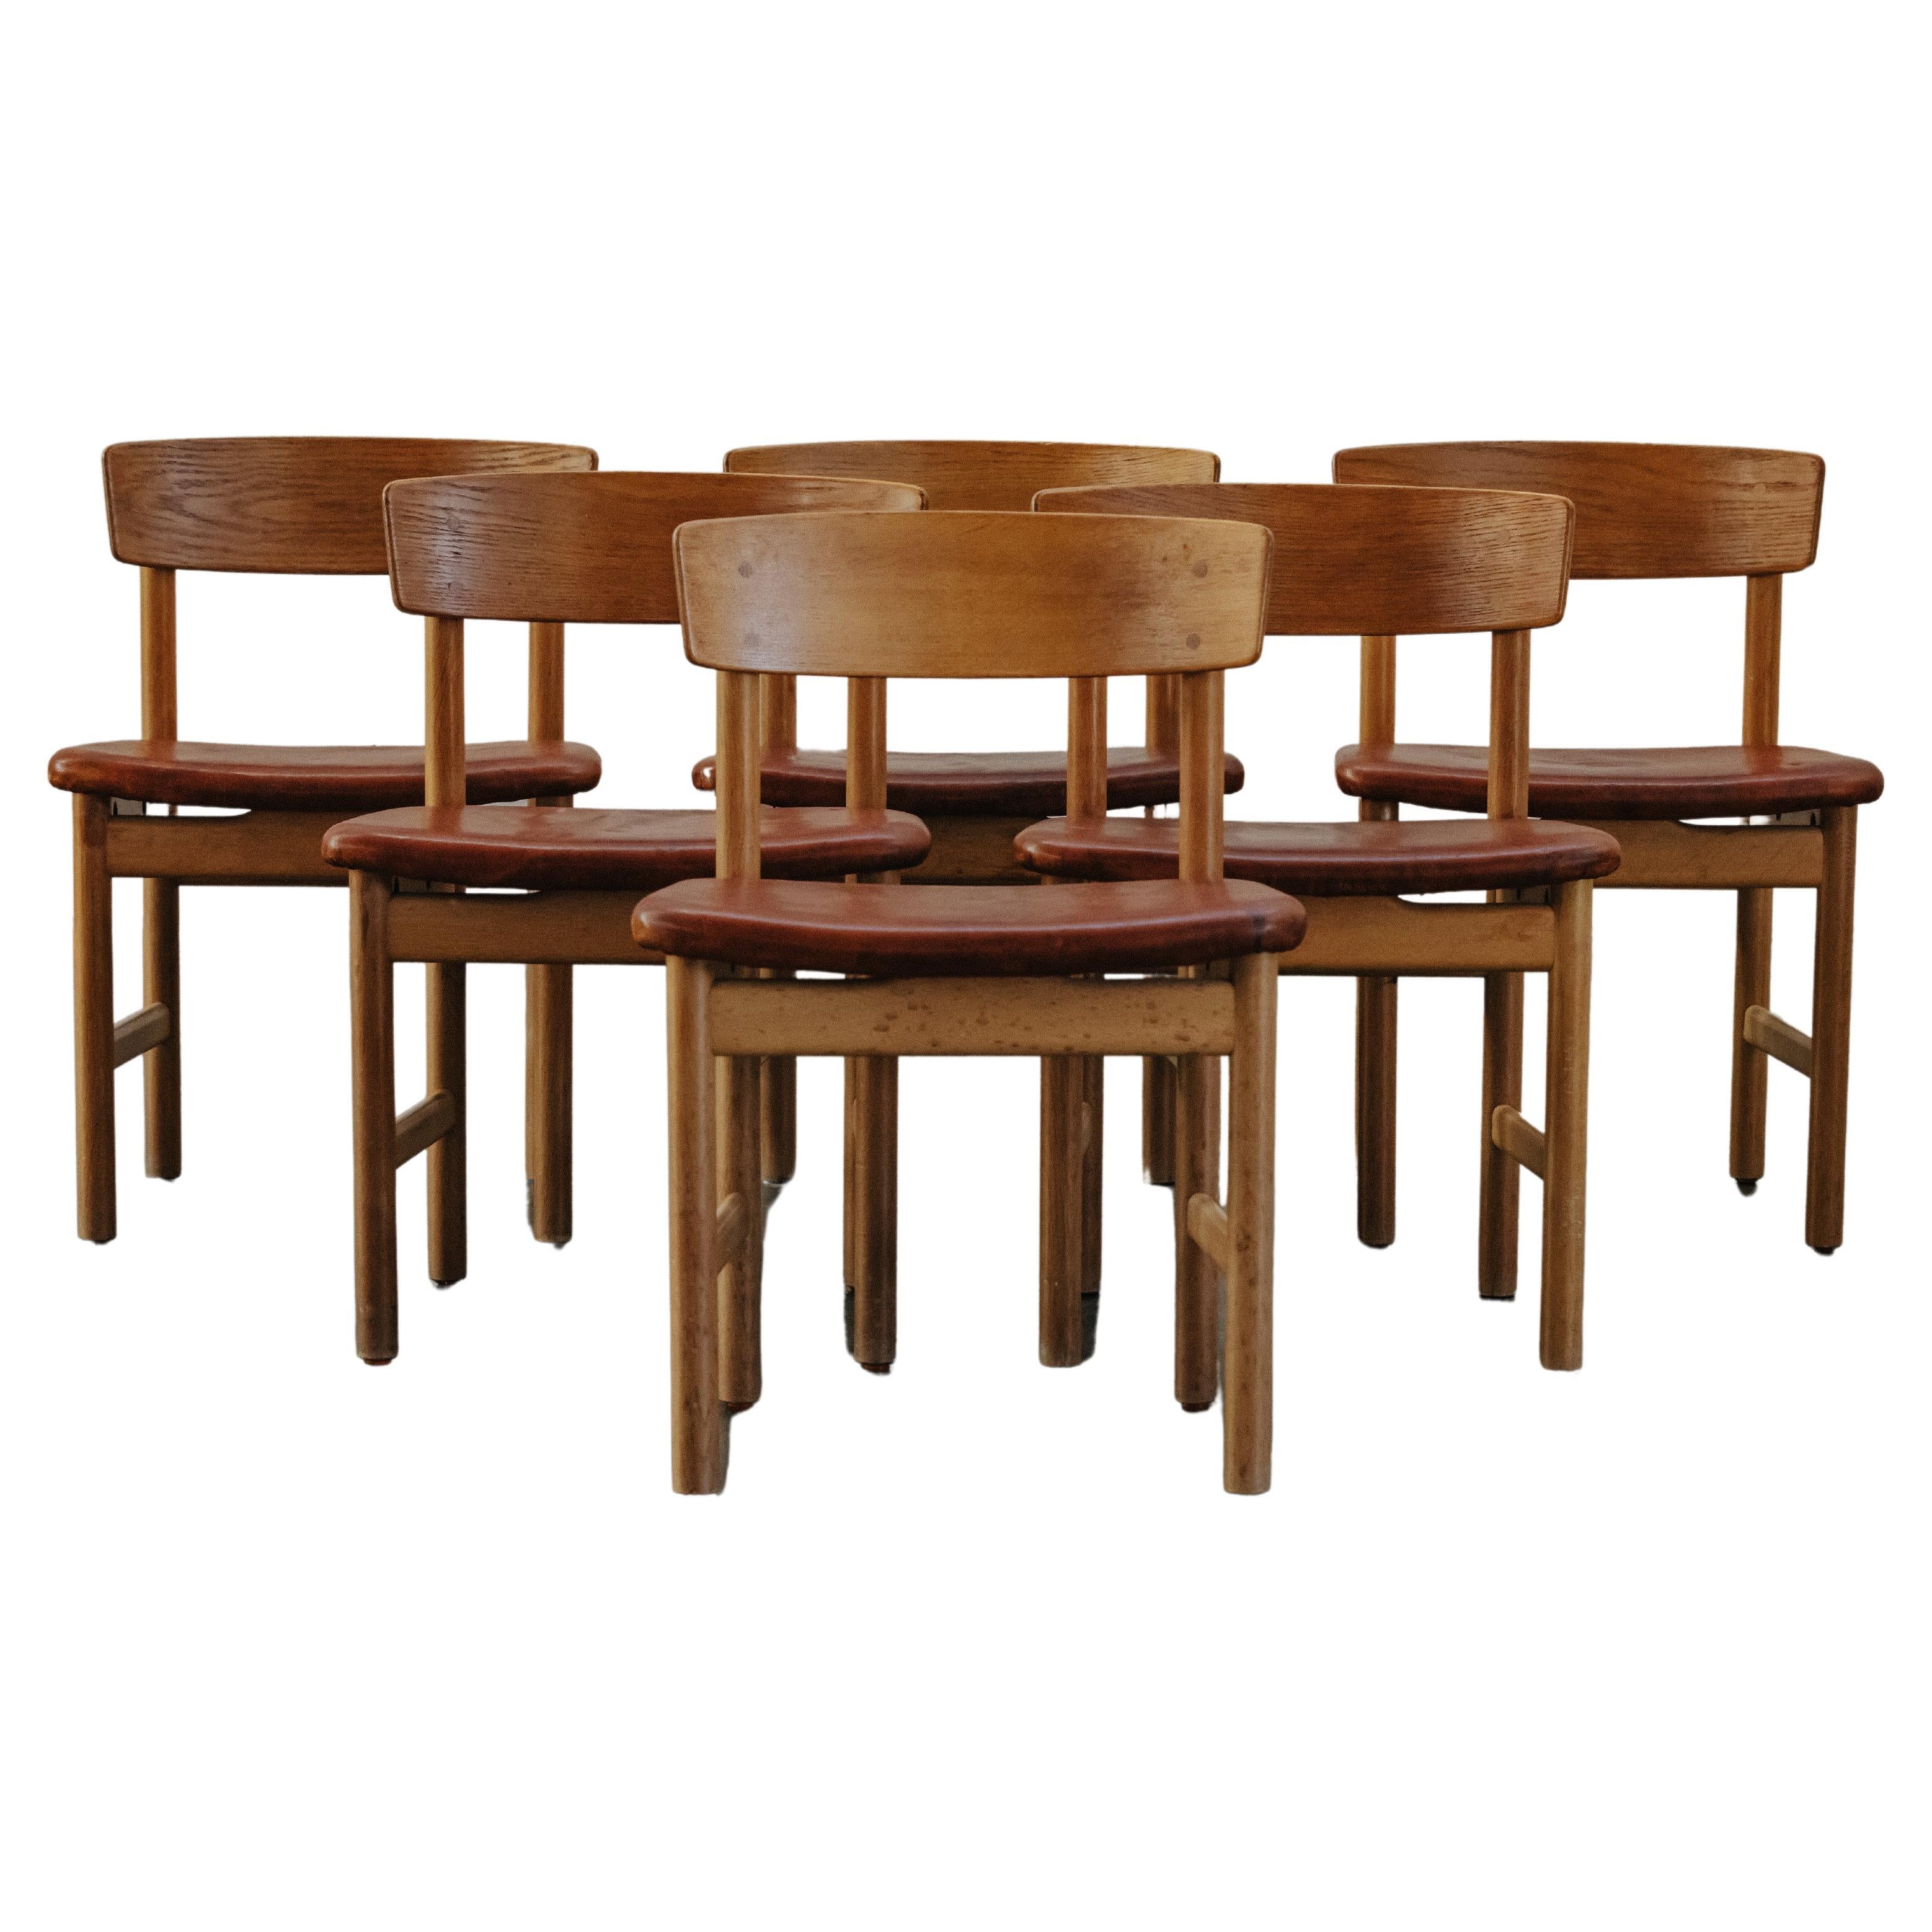 Vintage Set Of Borge Mogensen Dining Chairs From Denmark, Circa 1970 For Sale